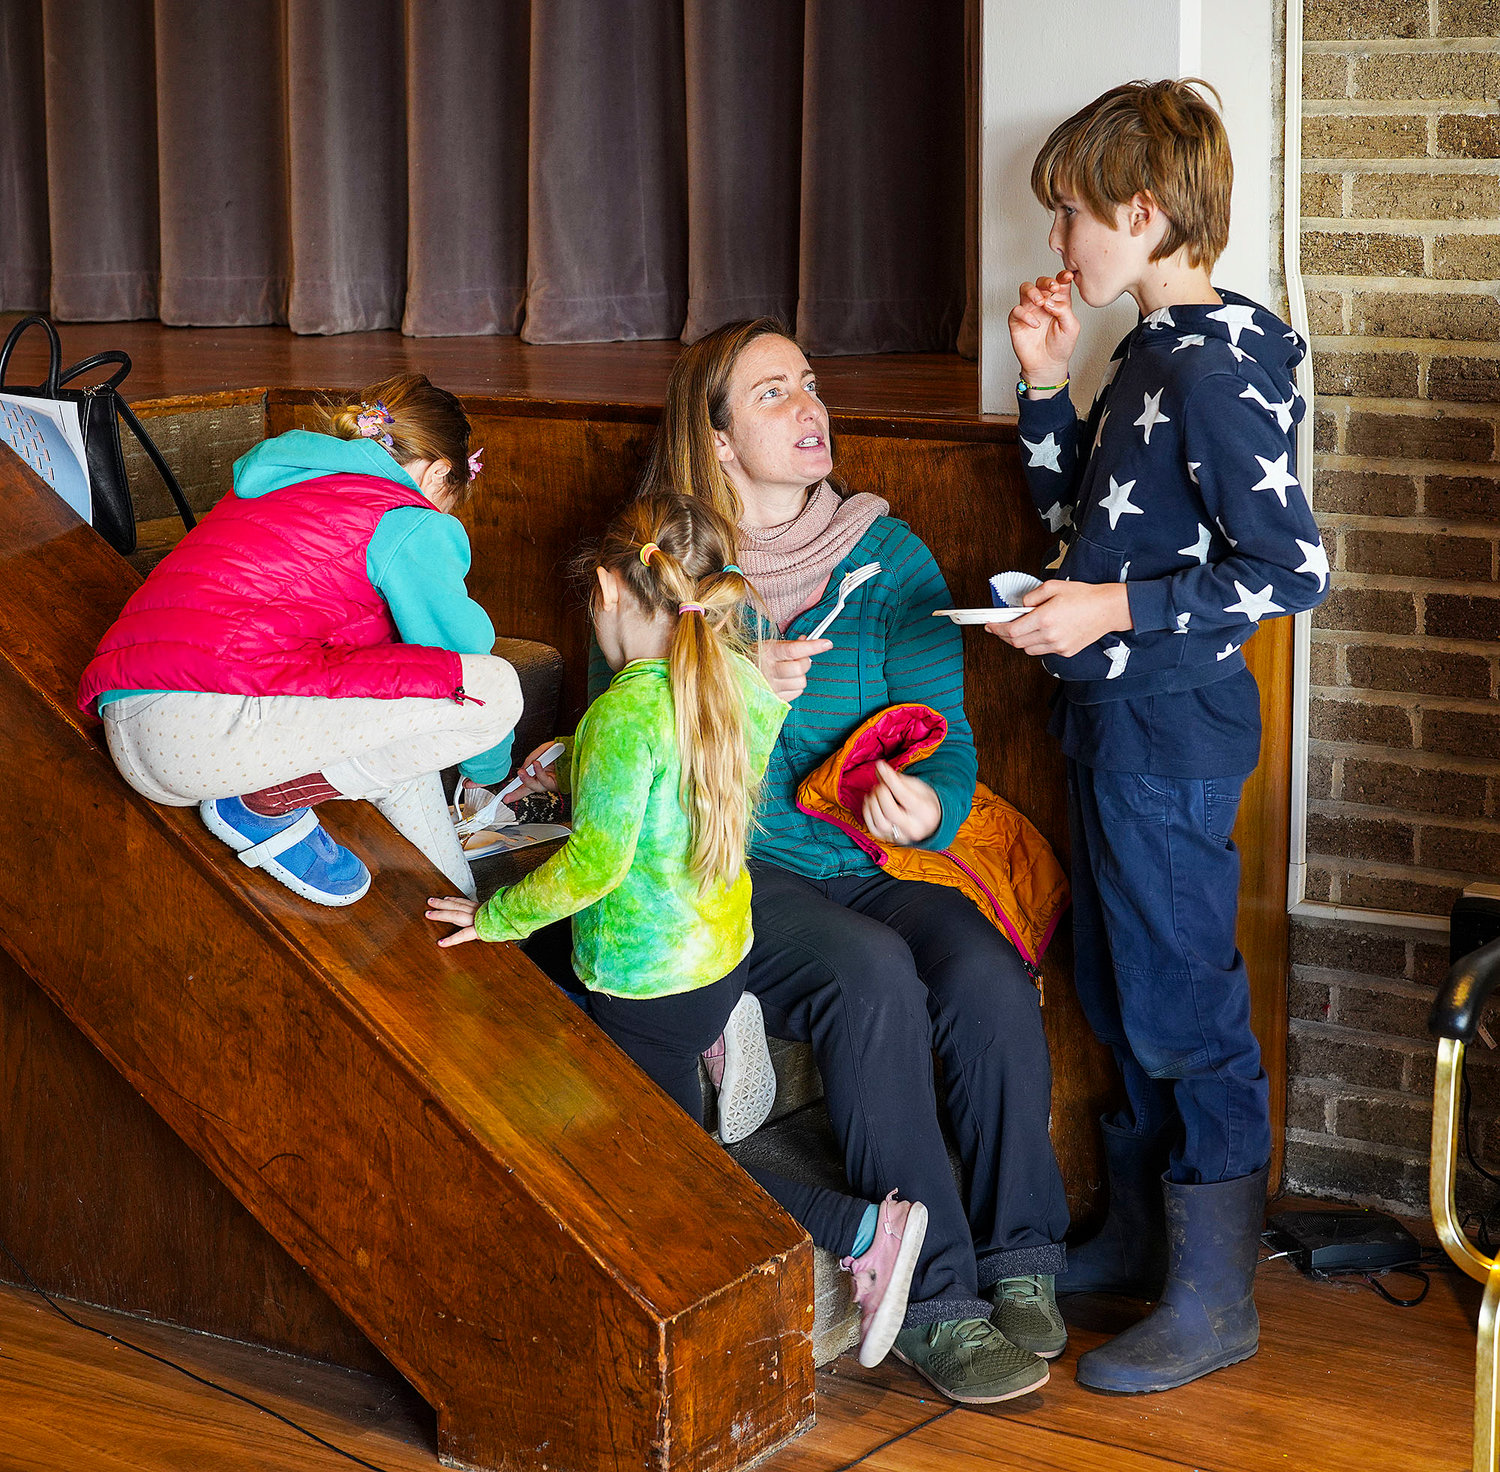 Jennie Theriaque,  and her children, l to r, Leah, 8,  Talia, 5, and Caleb, 11, taste several of the bake goods on the steps to the stage at the temple.